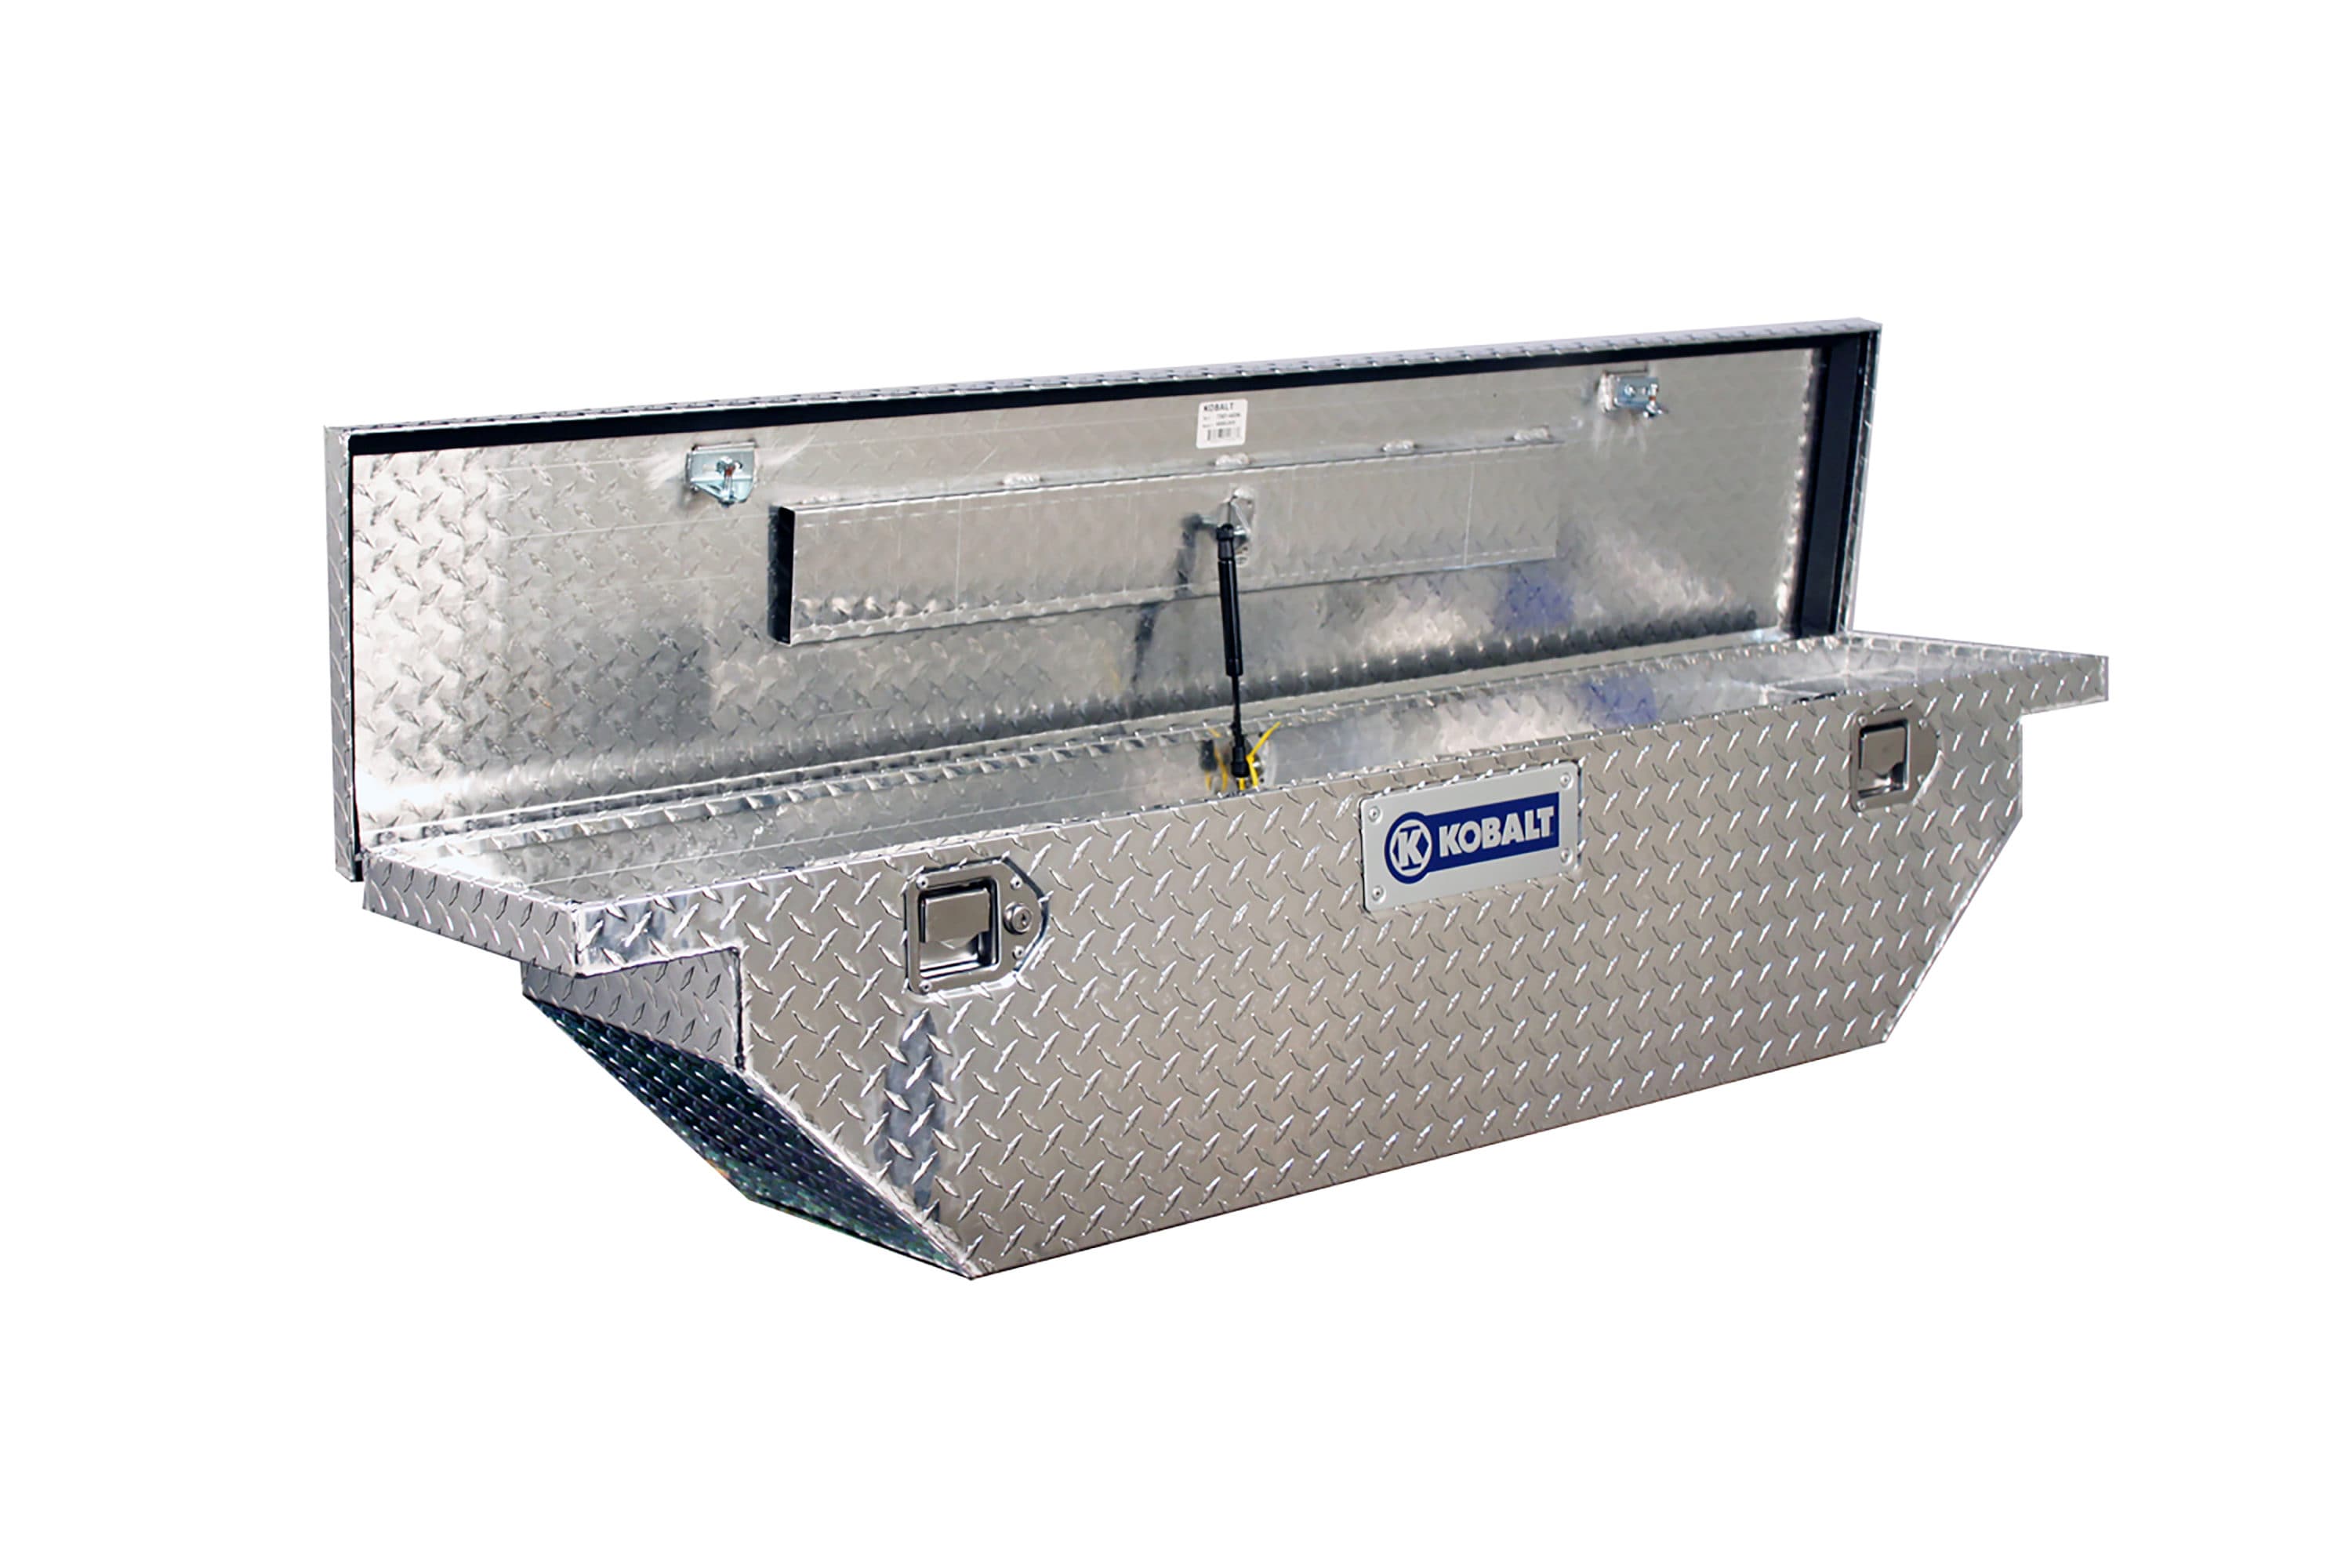 Kobalt 63-in x 14-in x 13-in Aluminum Crossover Truck Tool Box at